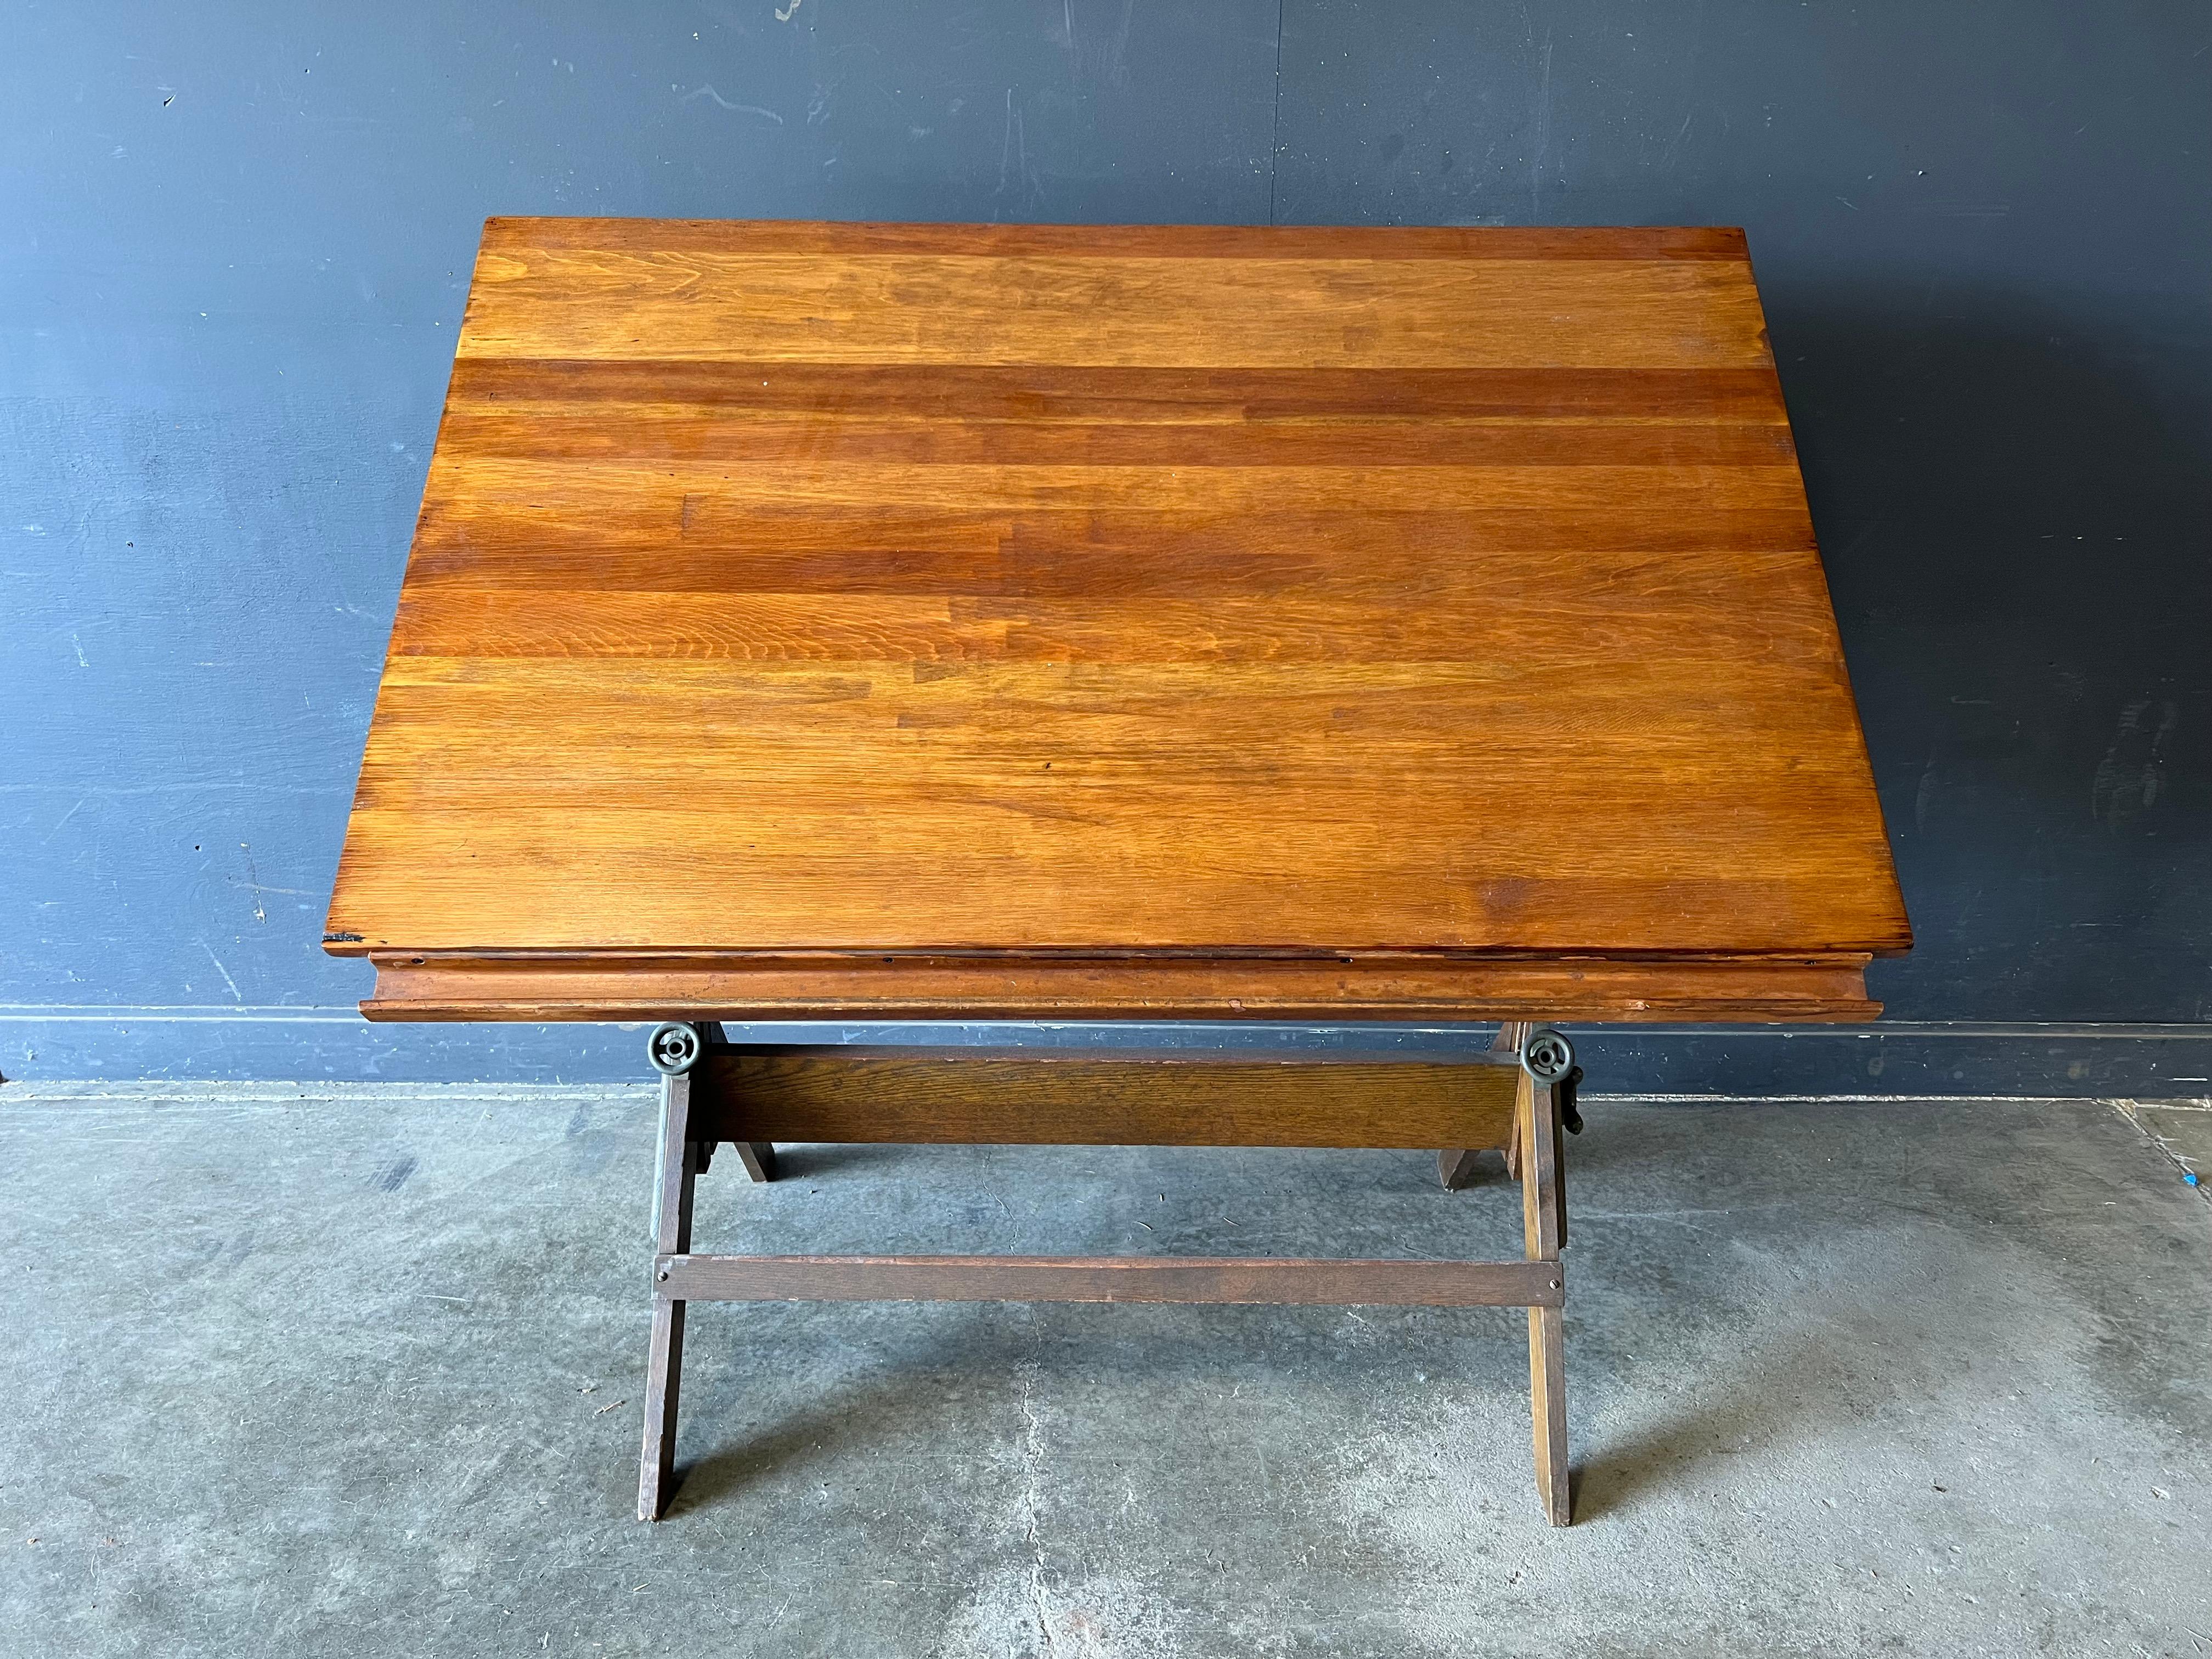 Large Industrial Antique Drafting Table by Dietzgen. A large model with wonderful patina on top. Cast iron handles for adjusting height. Table can be horizontal flat for working desk, or almost vertical and any angle. This is a great example of the